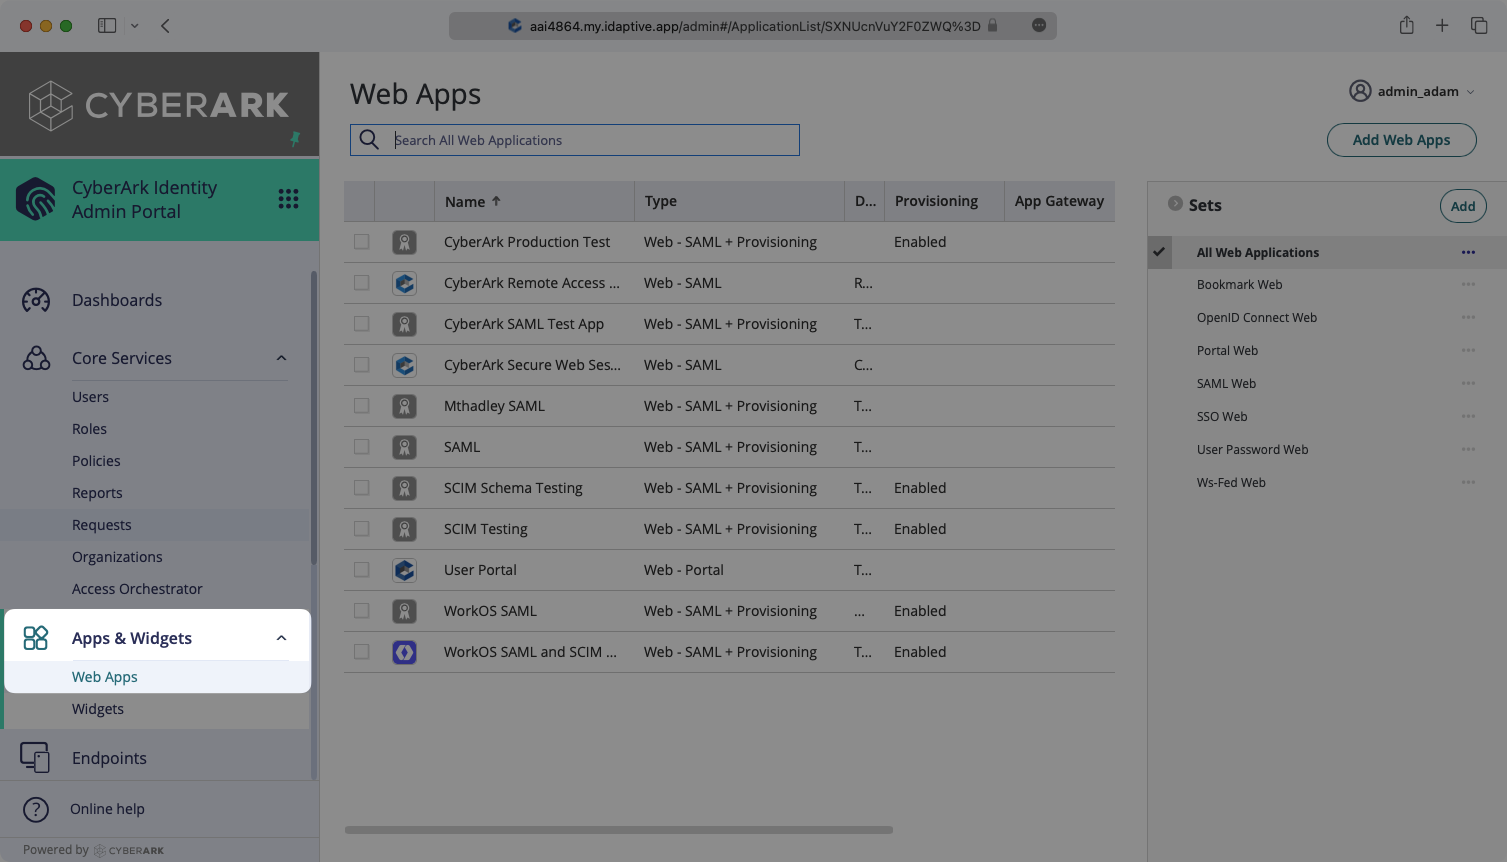 A screenshot showing where to select 'Web Apps" in the CyberArk dashboard.